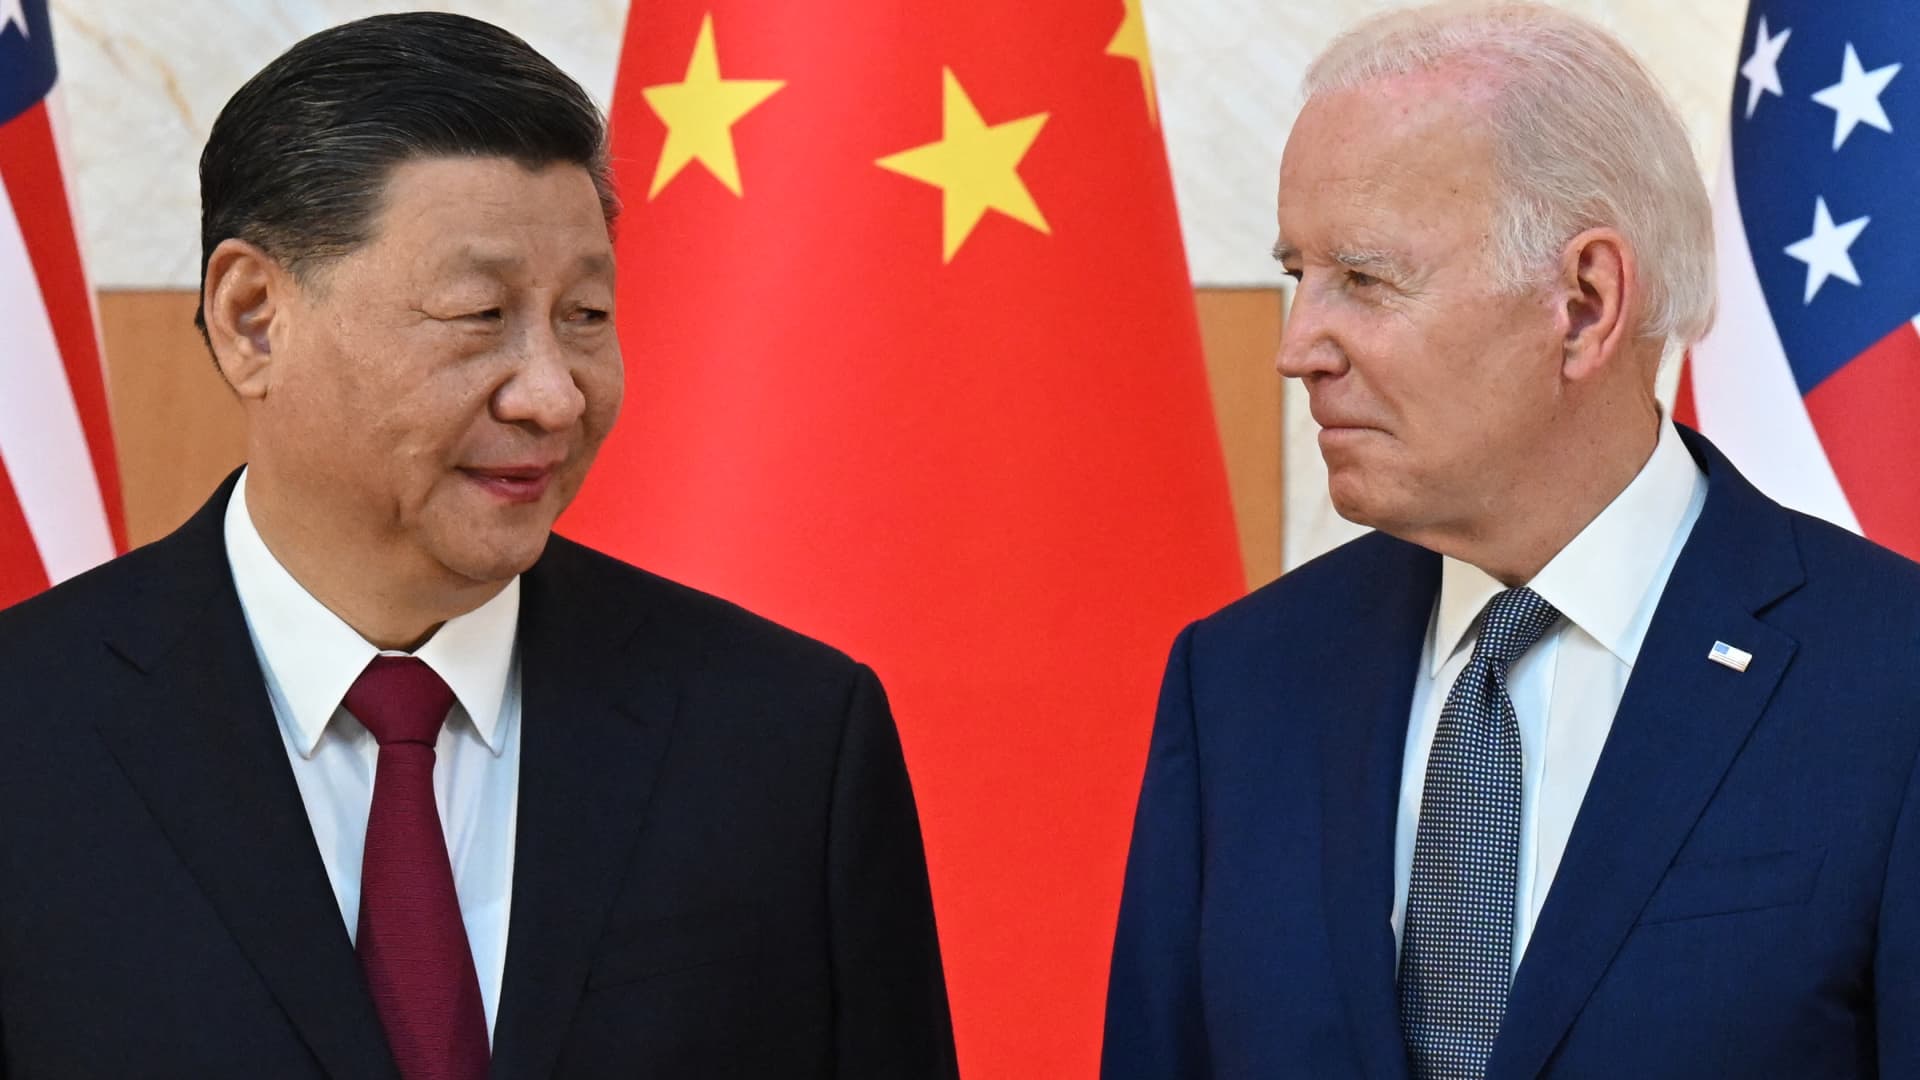 U.S.-China relations are on a ‘dangerous’ path with ‘no trust’ between them, experts warn